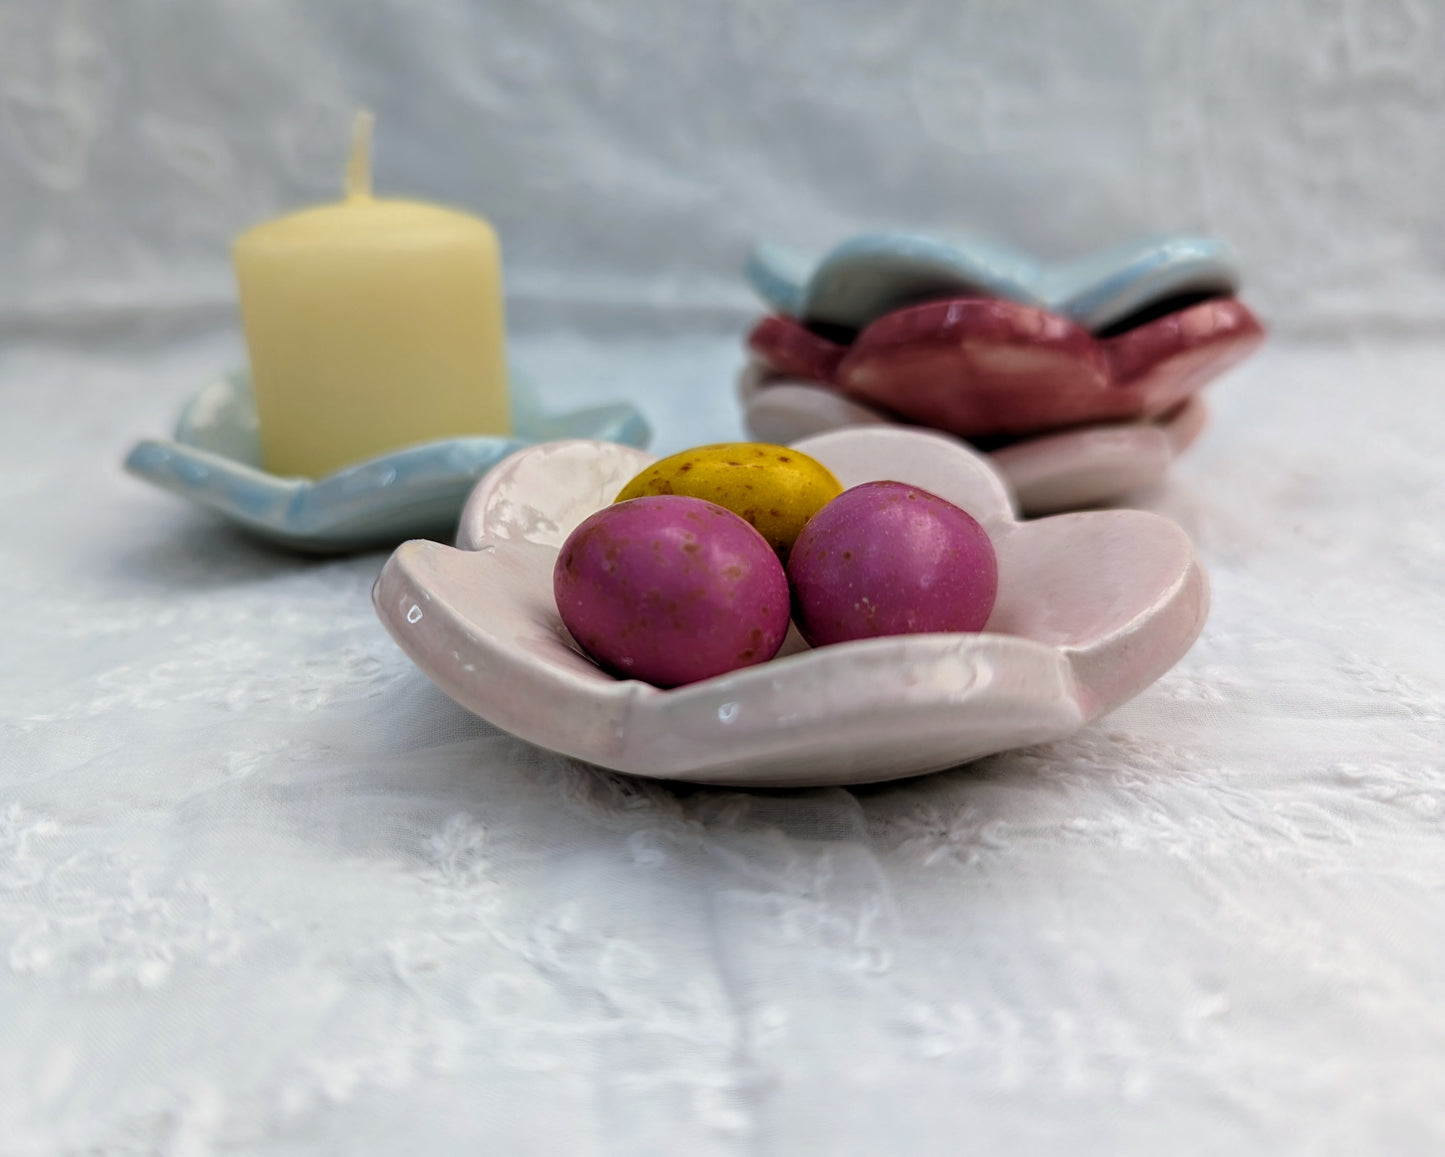 Sea Bramble Ceramics - Handmade little Flower dishes that are perfect for butter, condiments, trinkets and tealights. Shown here as a candle and a treats dish.